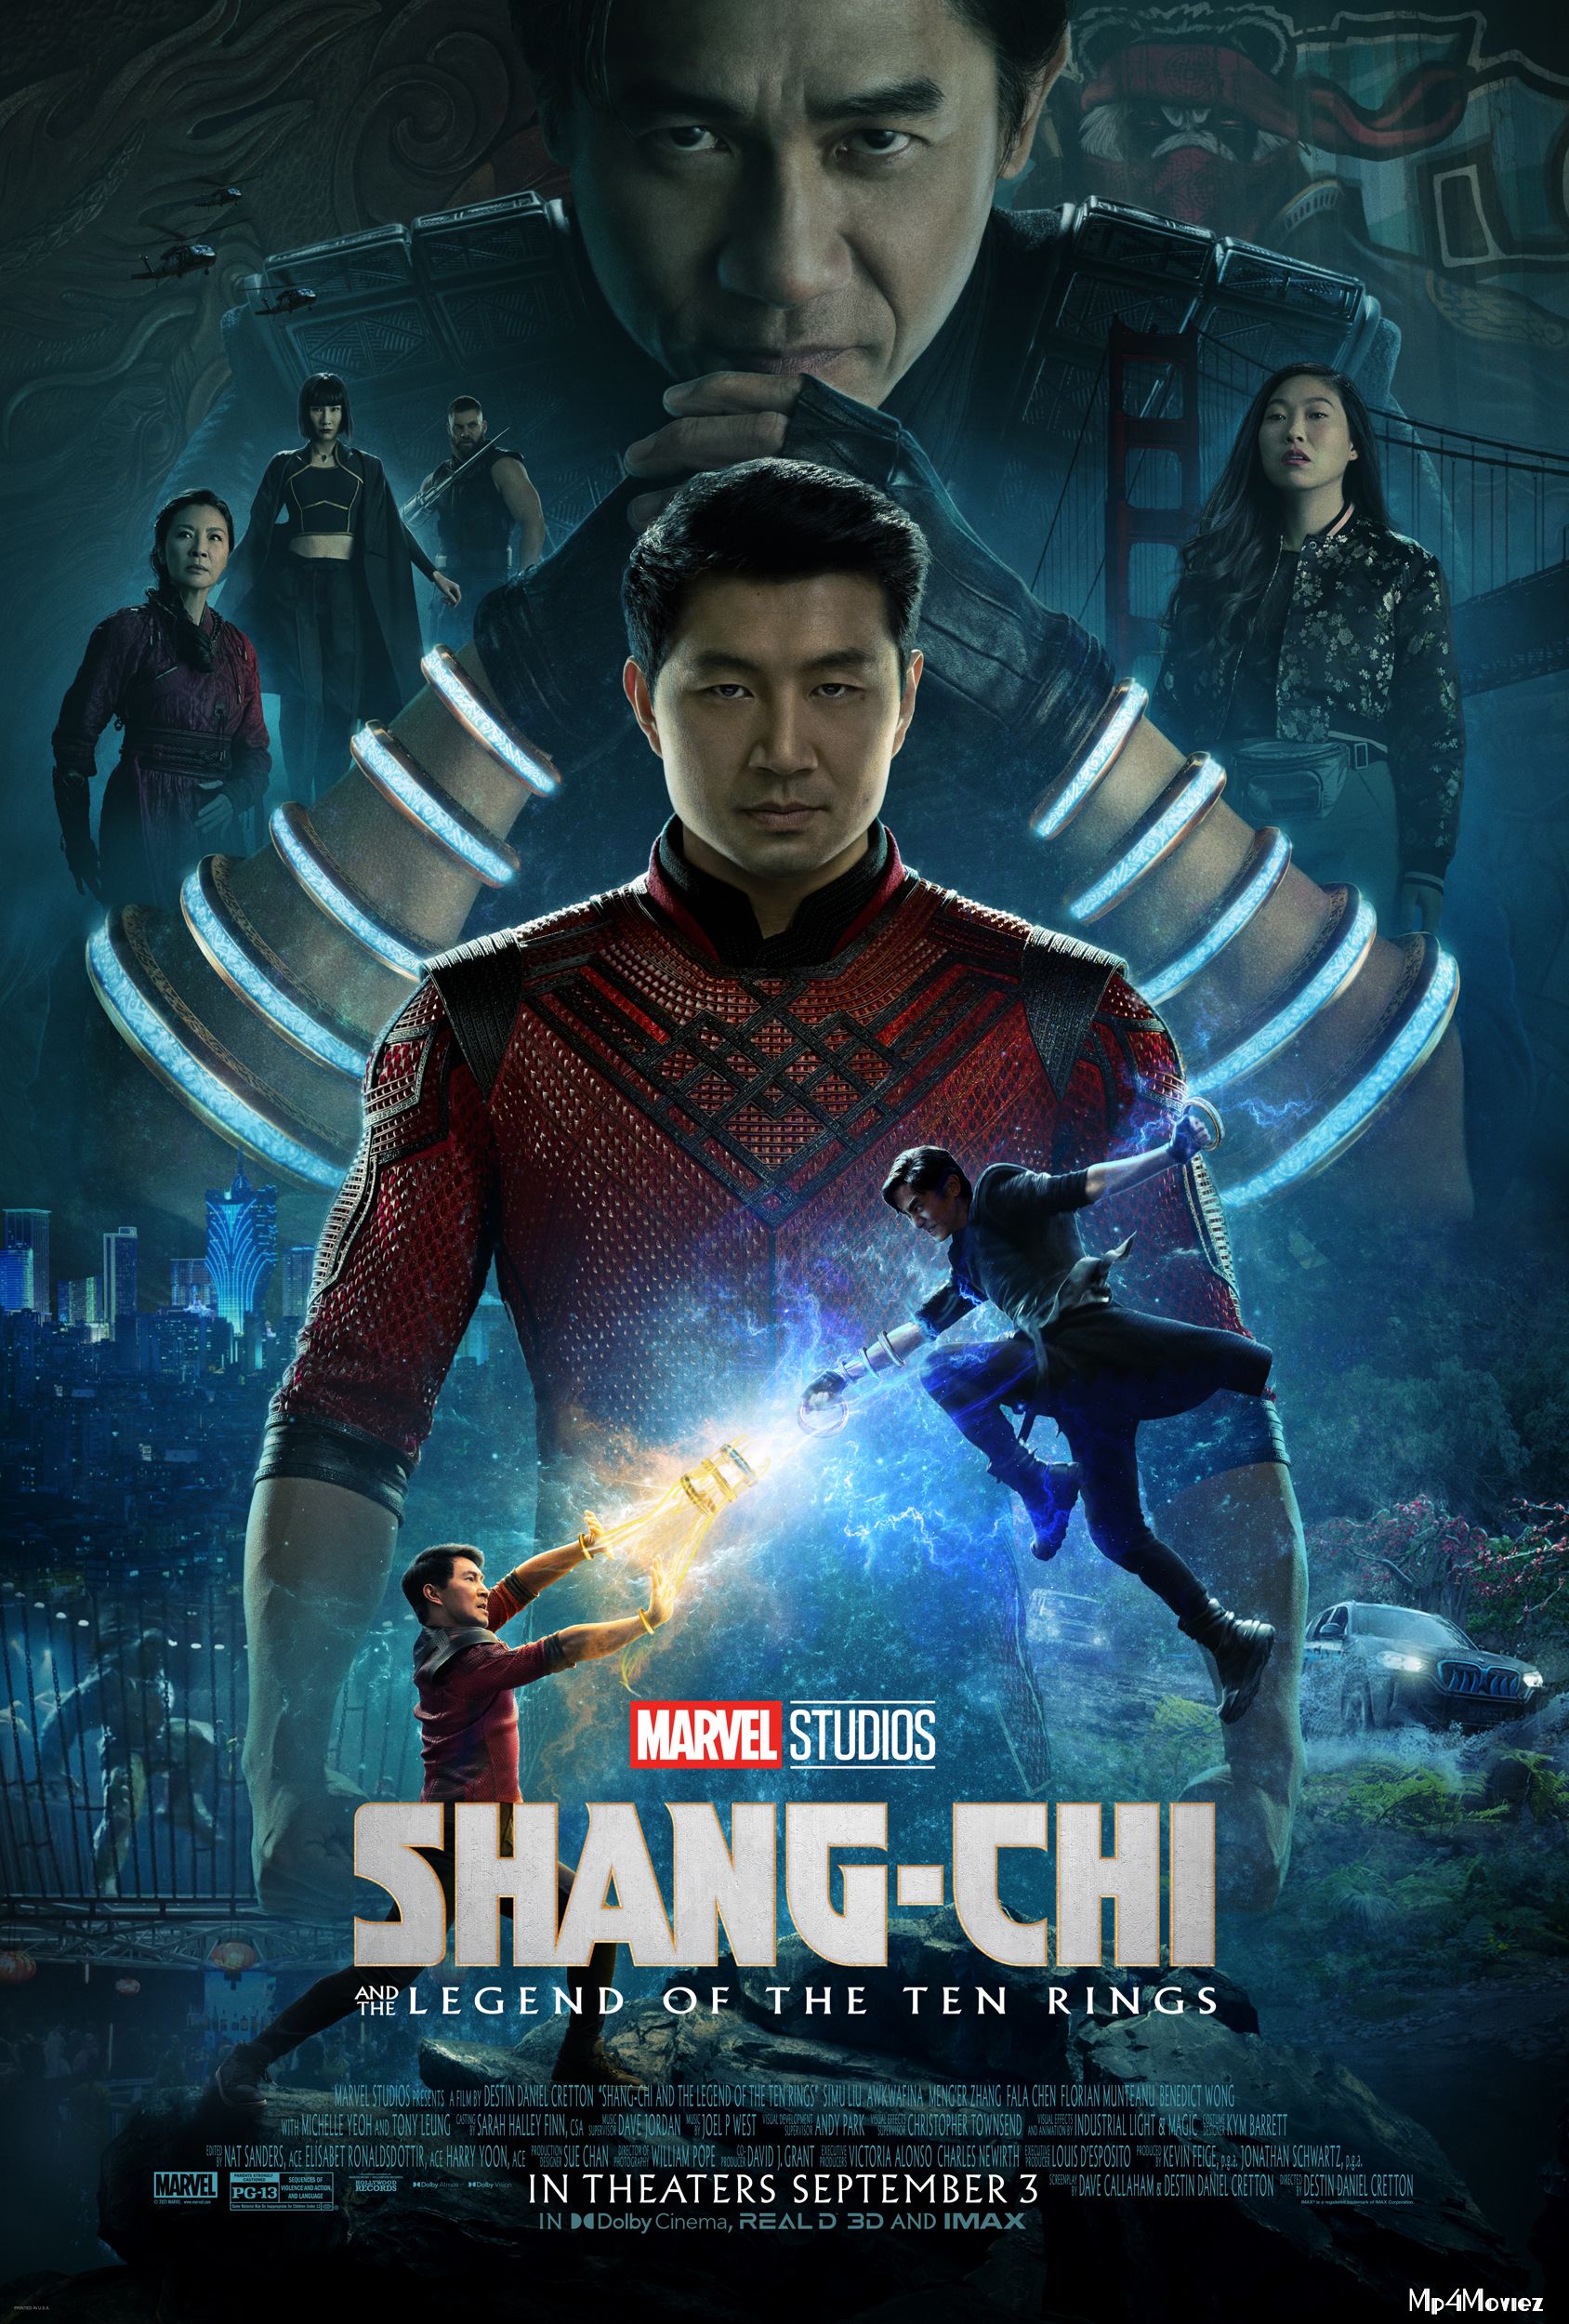 Shang-Chi and the Legend of the Ten Rings (2021) Hindi Dubbed Full Movie download full movie